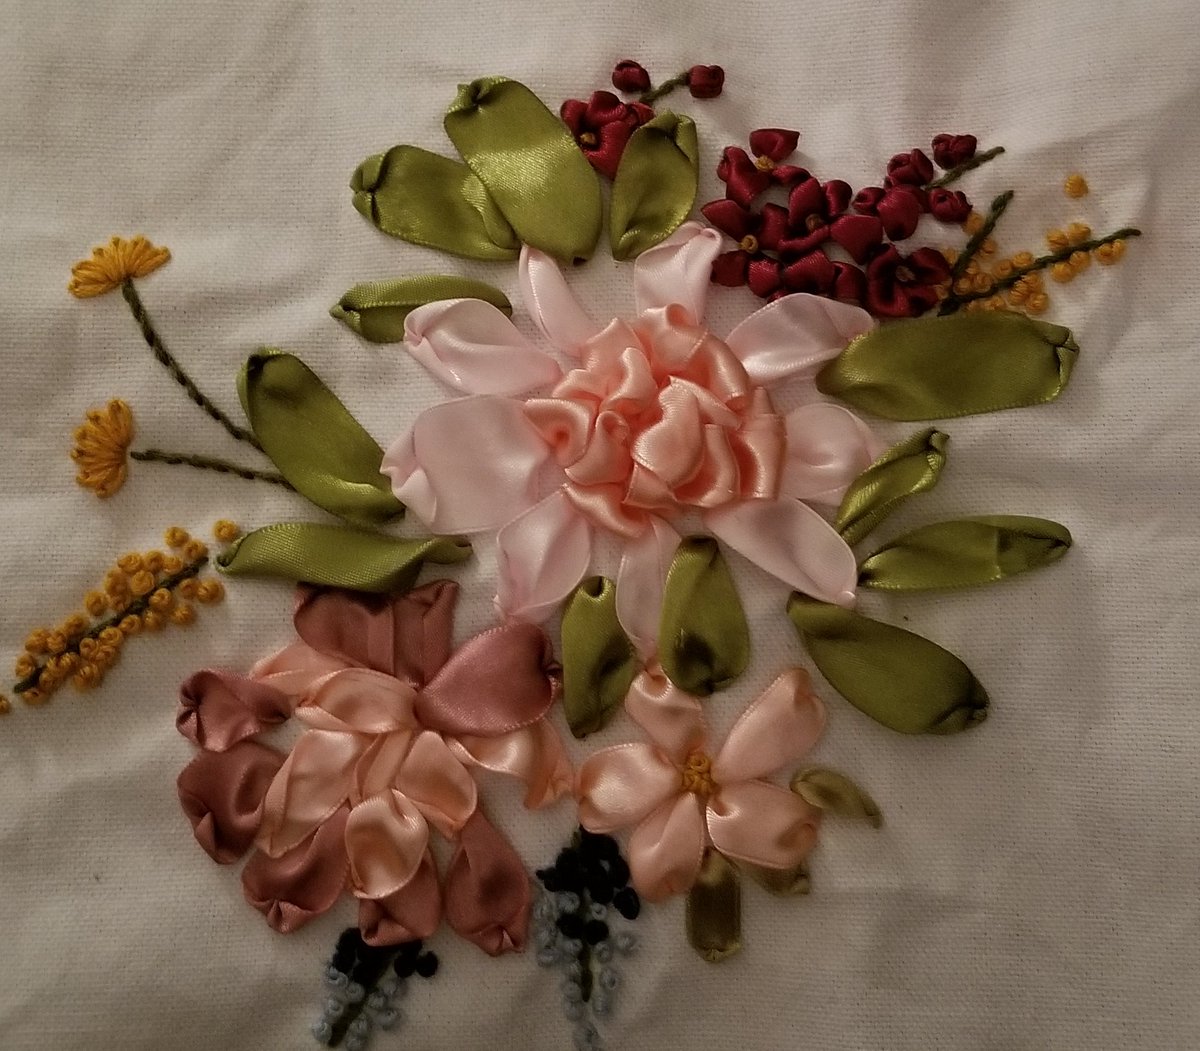 So I have been spending my evenings feeling crafty.  And I created this with ribbons. #crafty #artwork #embroideryart #embroidery #needlework #creating #ribbons #prettystuff